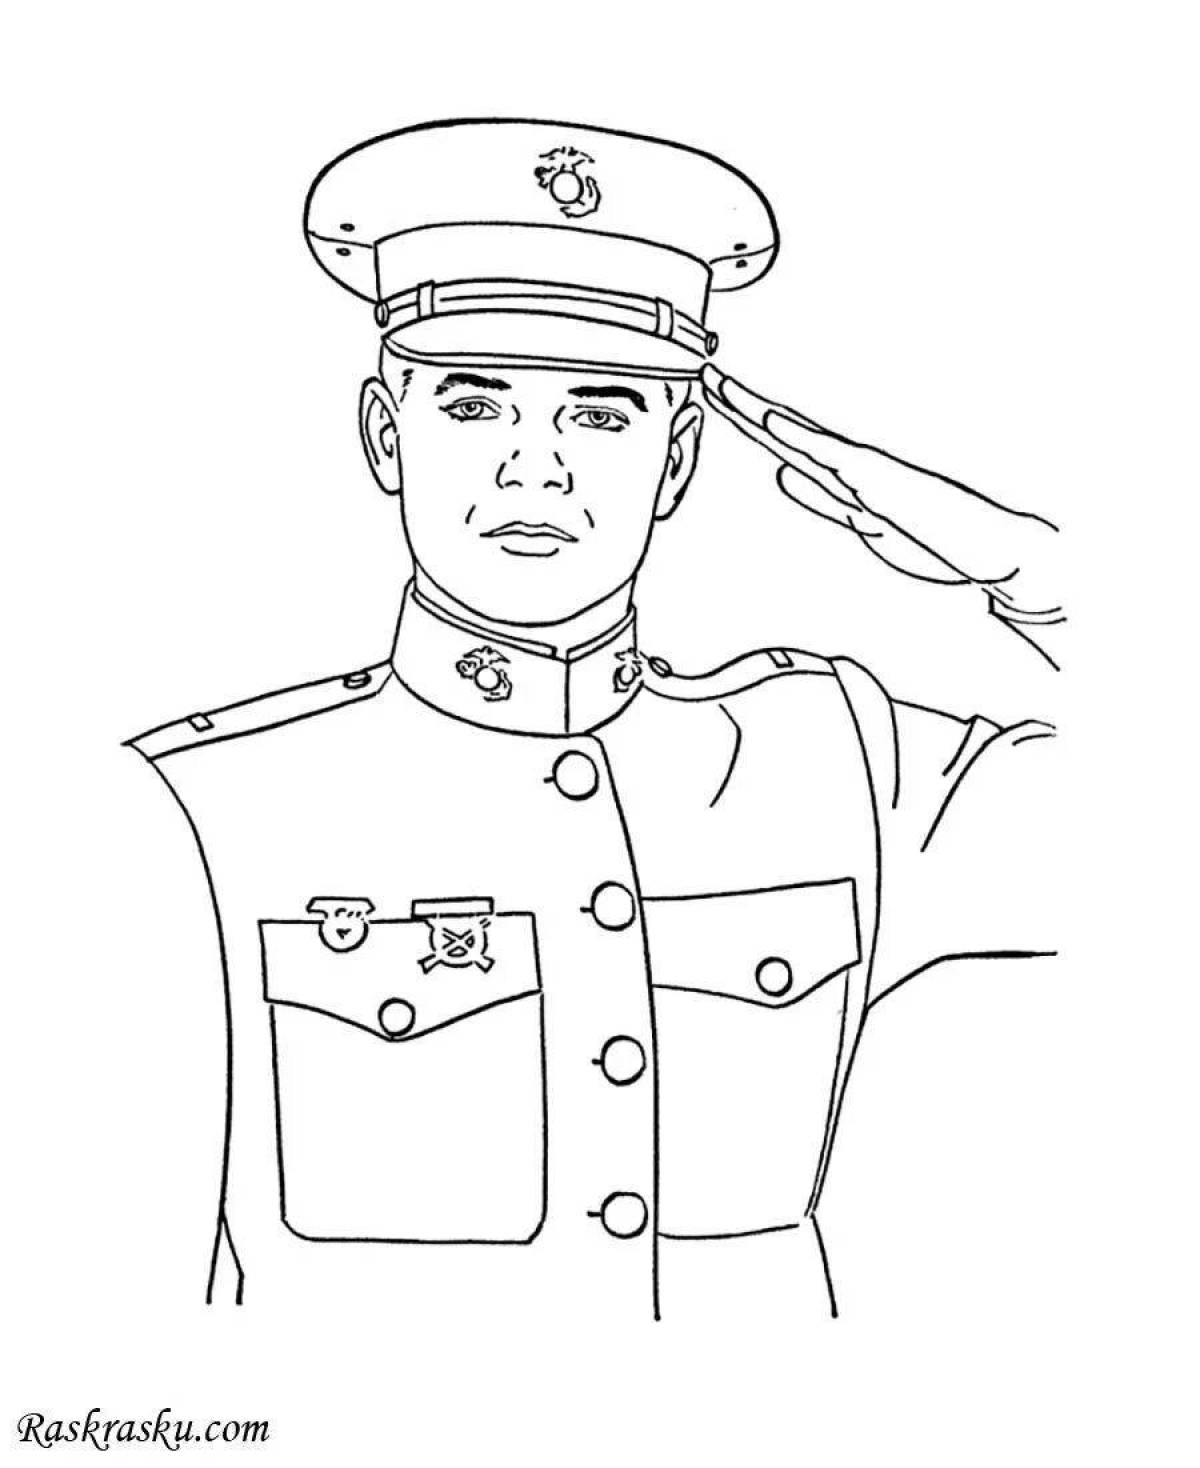 Inviting civic coloring page